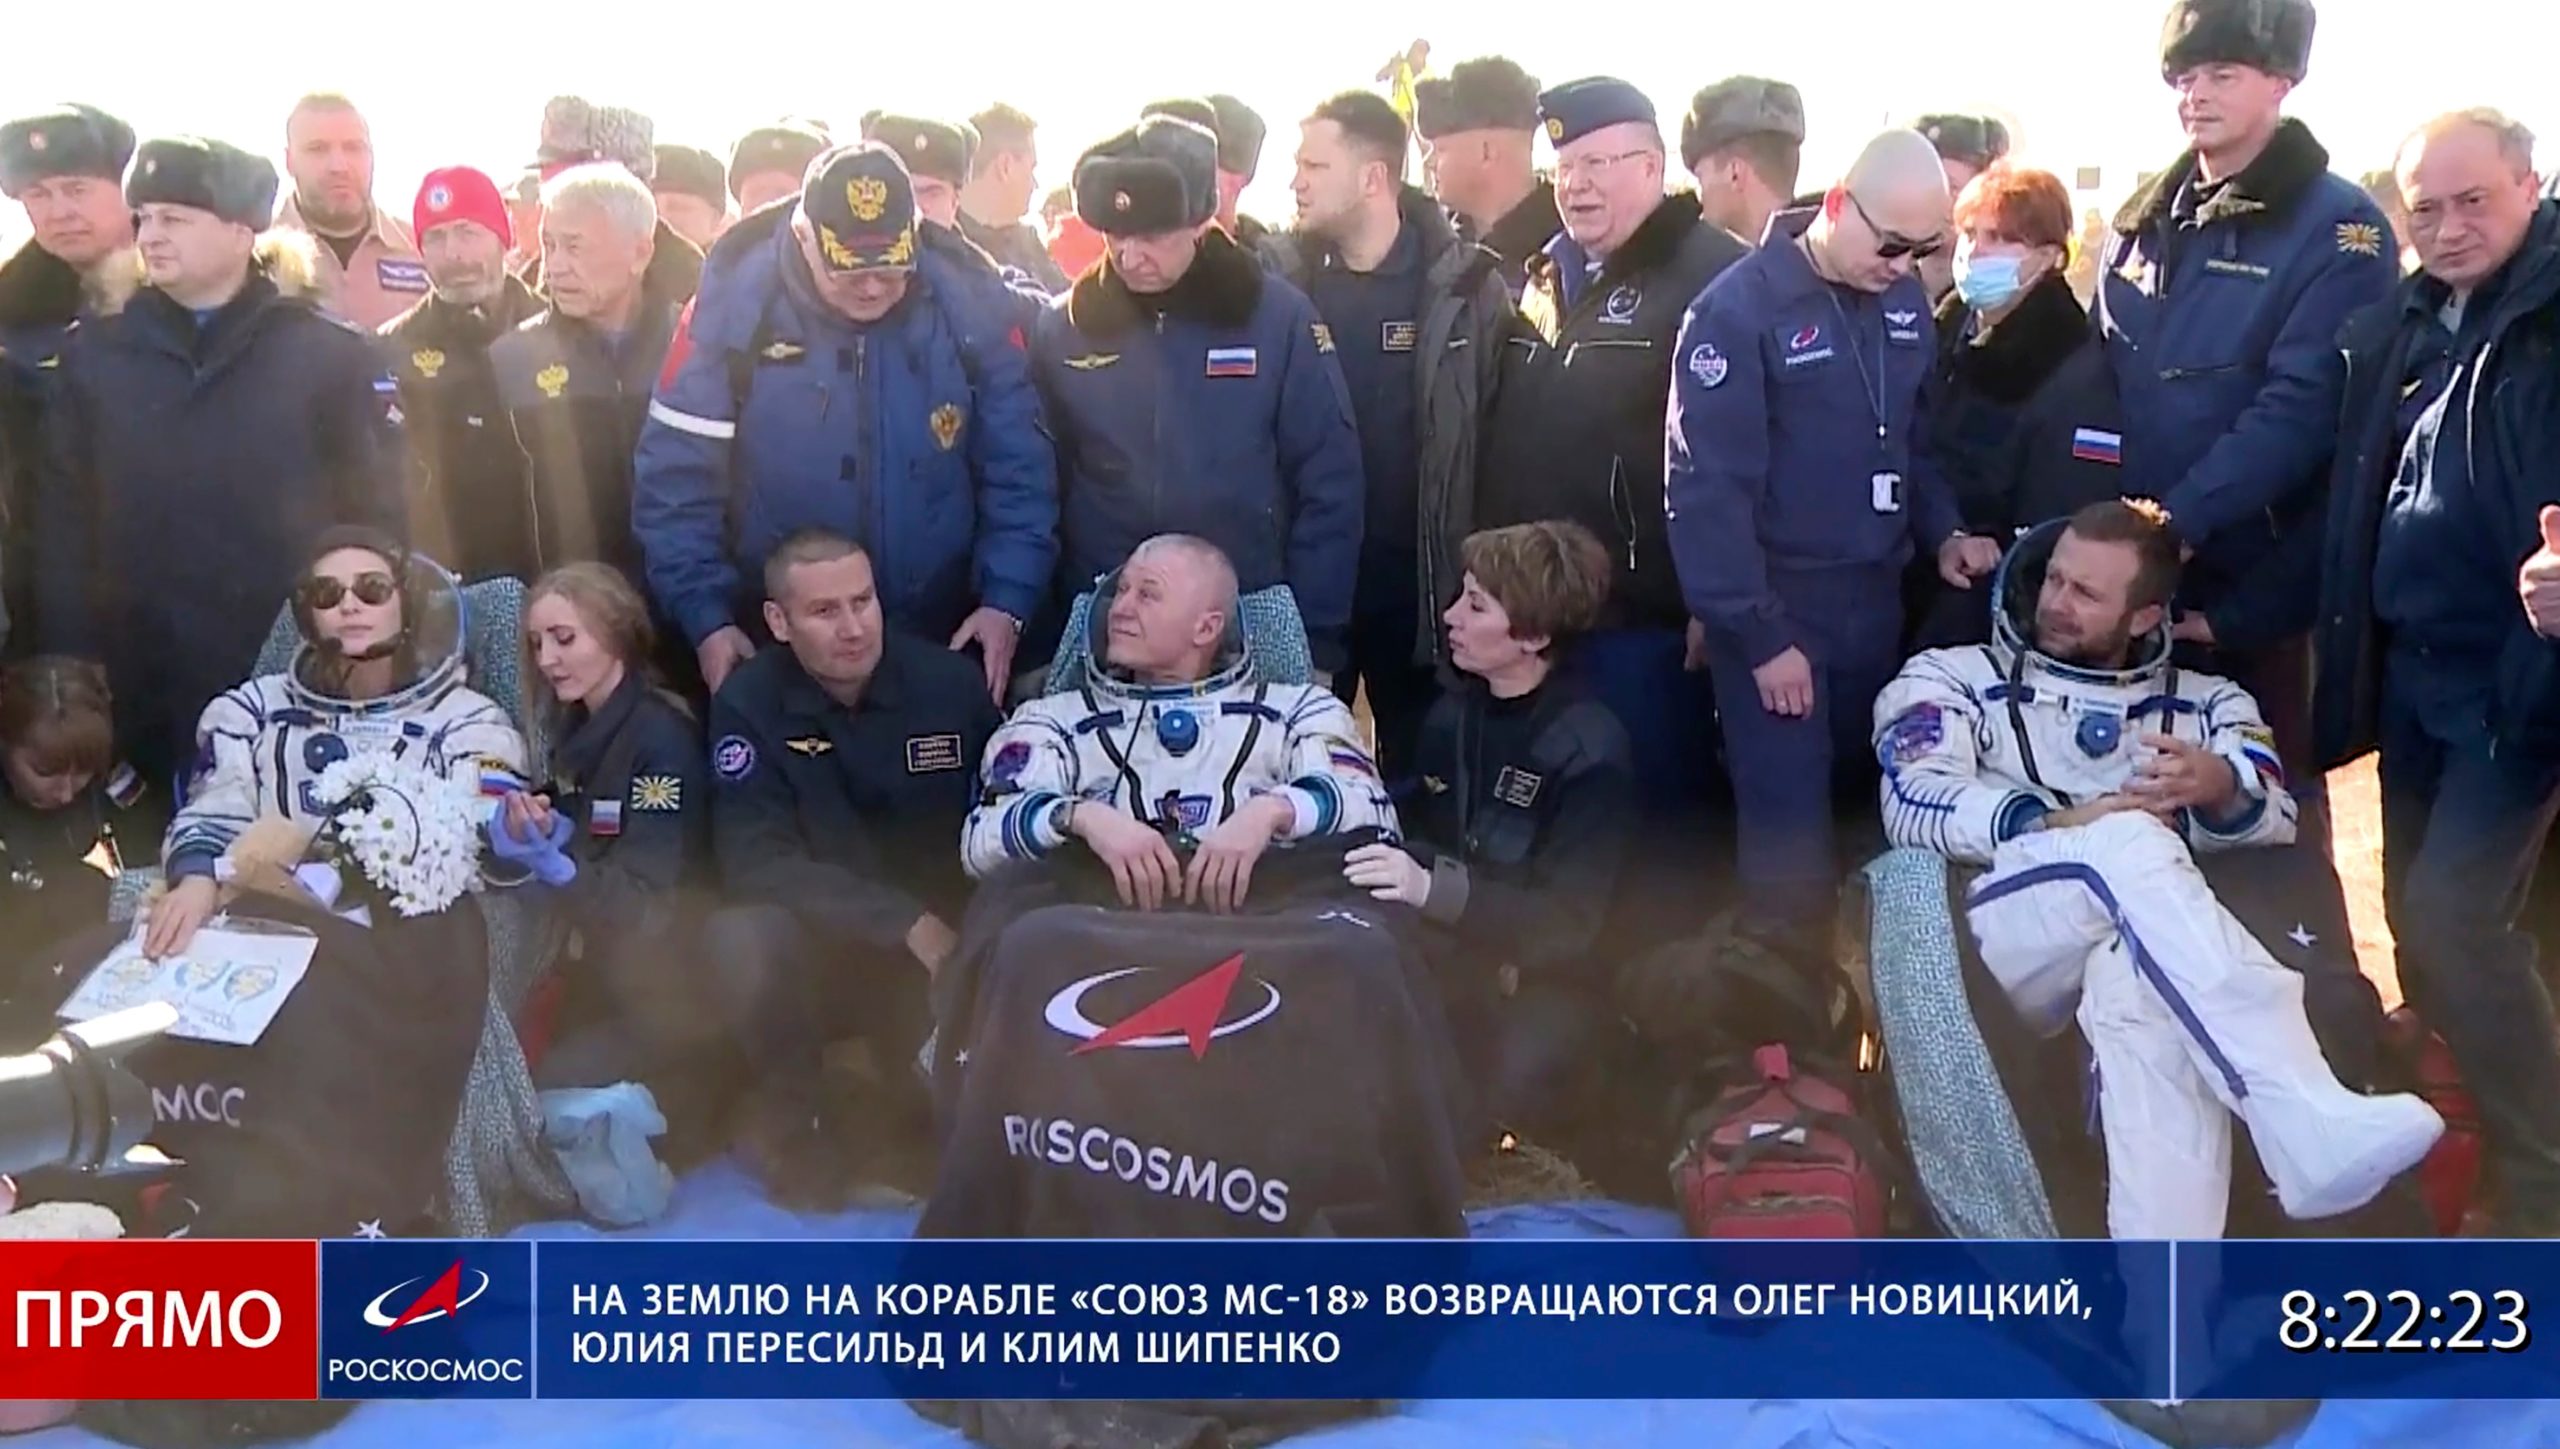 Russian space agency cosmonaut Oleg Novitskiy, centre, actress Yulia Peresild, left, and film director Klim Shipenko sit in chairs shortly after the landing of the Russian Soyuz MS-18 space capsule. (Image: Roscosmos Space Agency, AP)